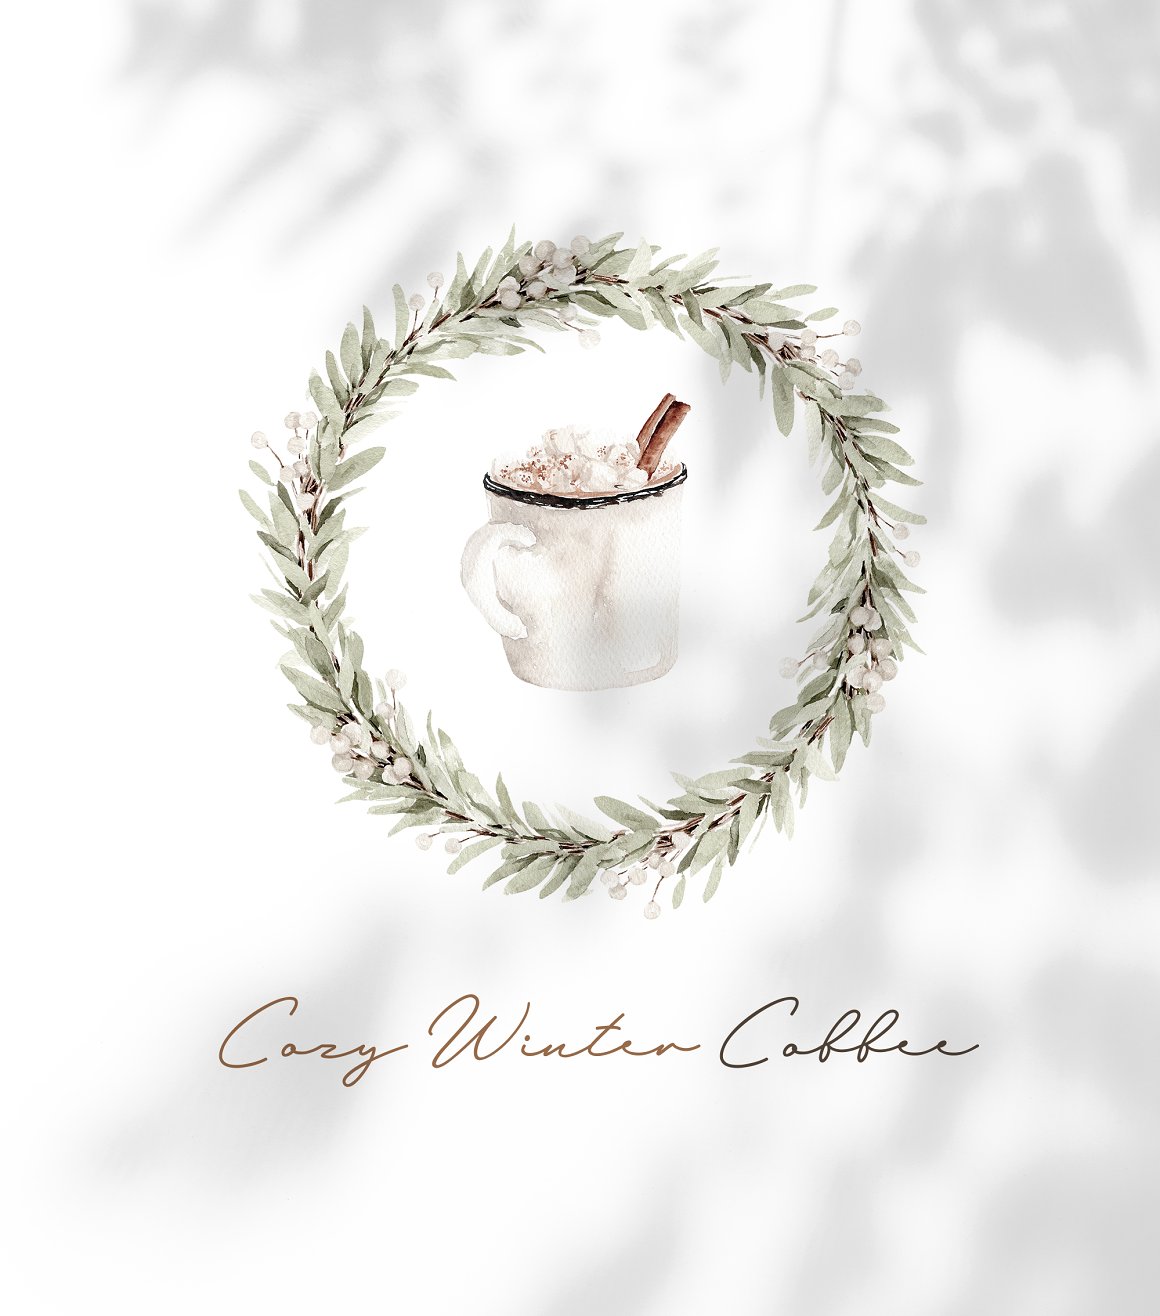 An illustration of a christmas wreath and cup of coffee and brown lettering "Cozy Winter Coffee" on a white background.